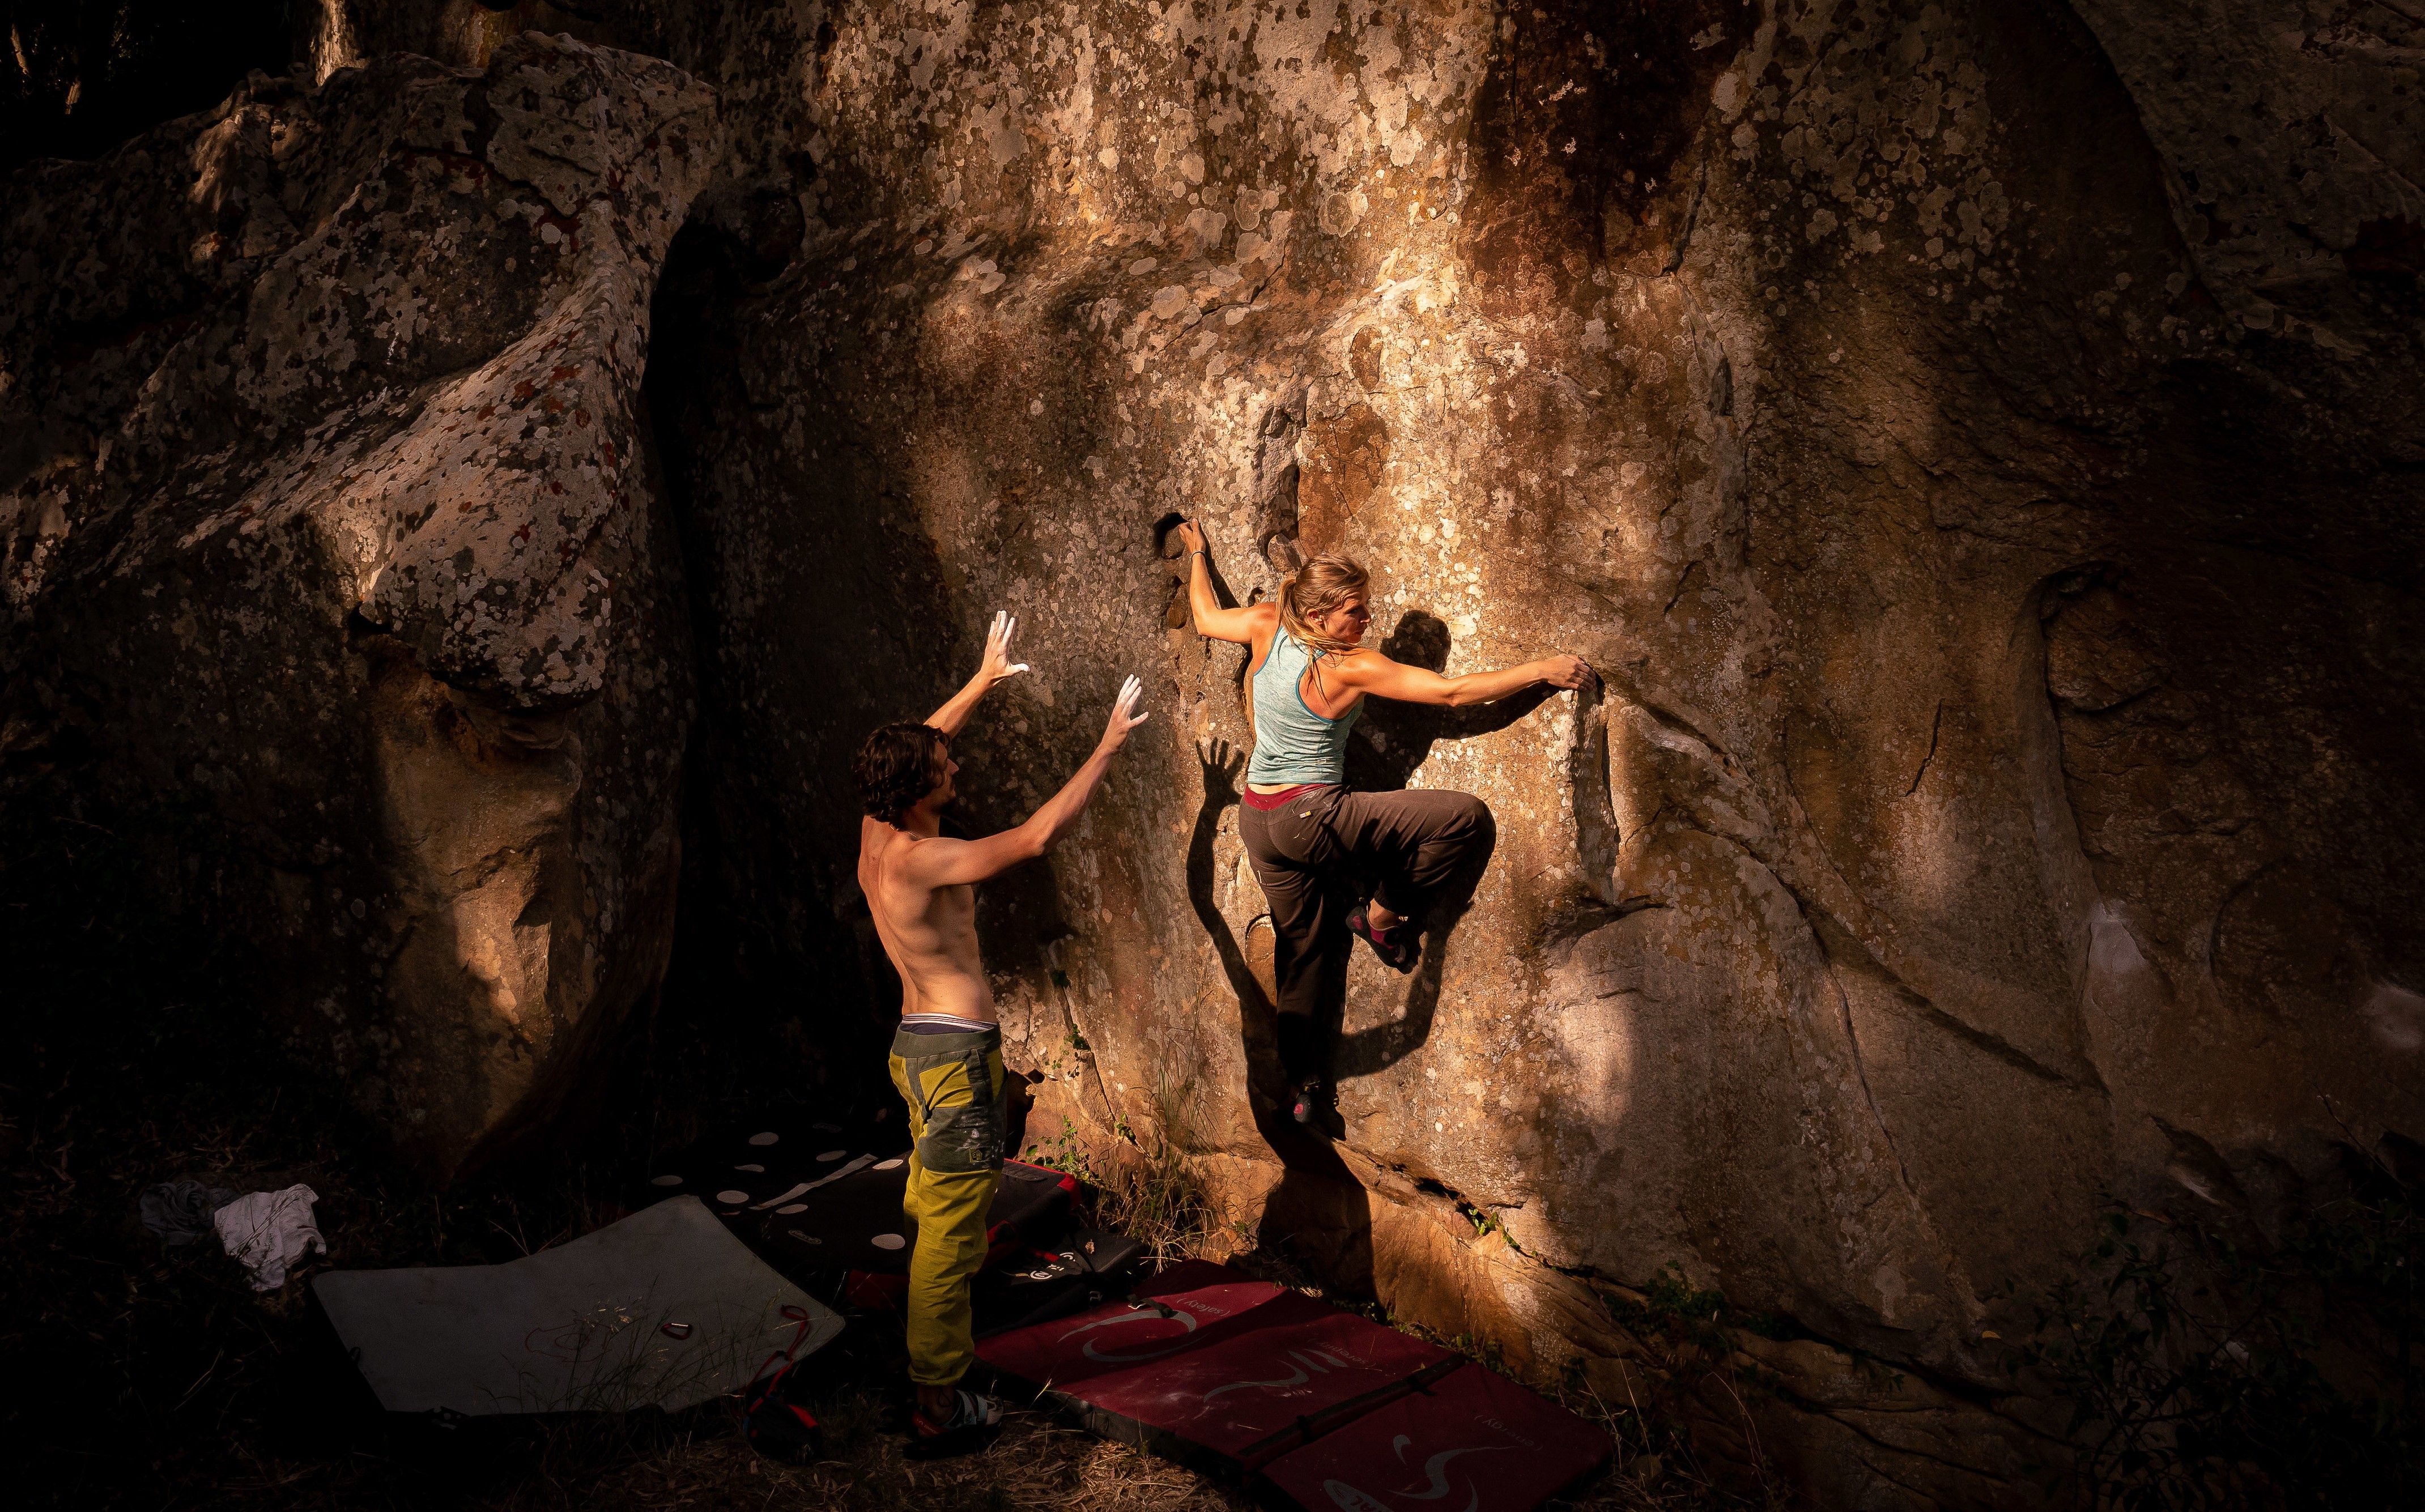 Two boulderers in Sicily